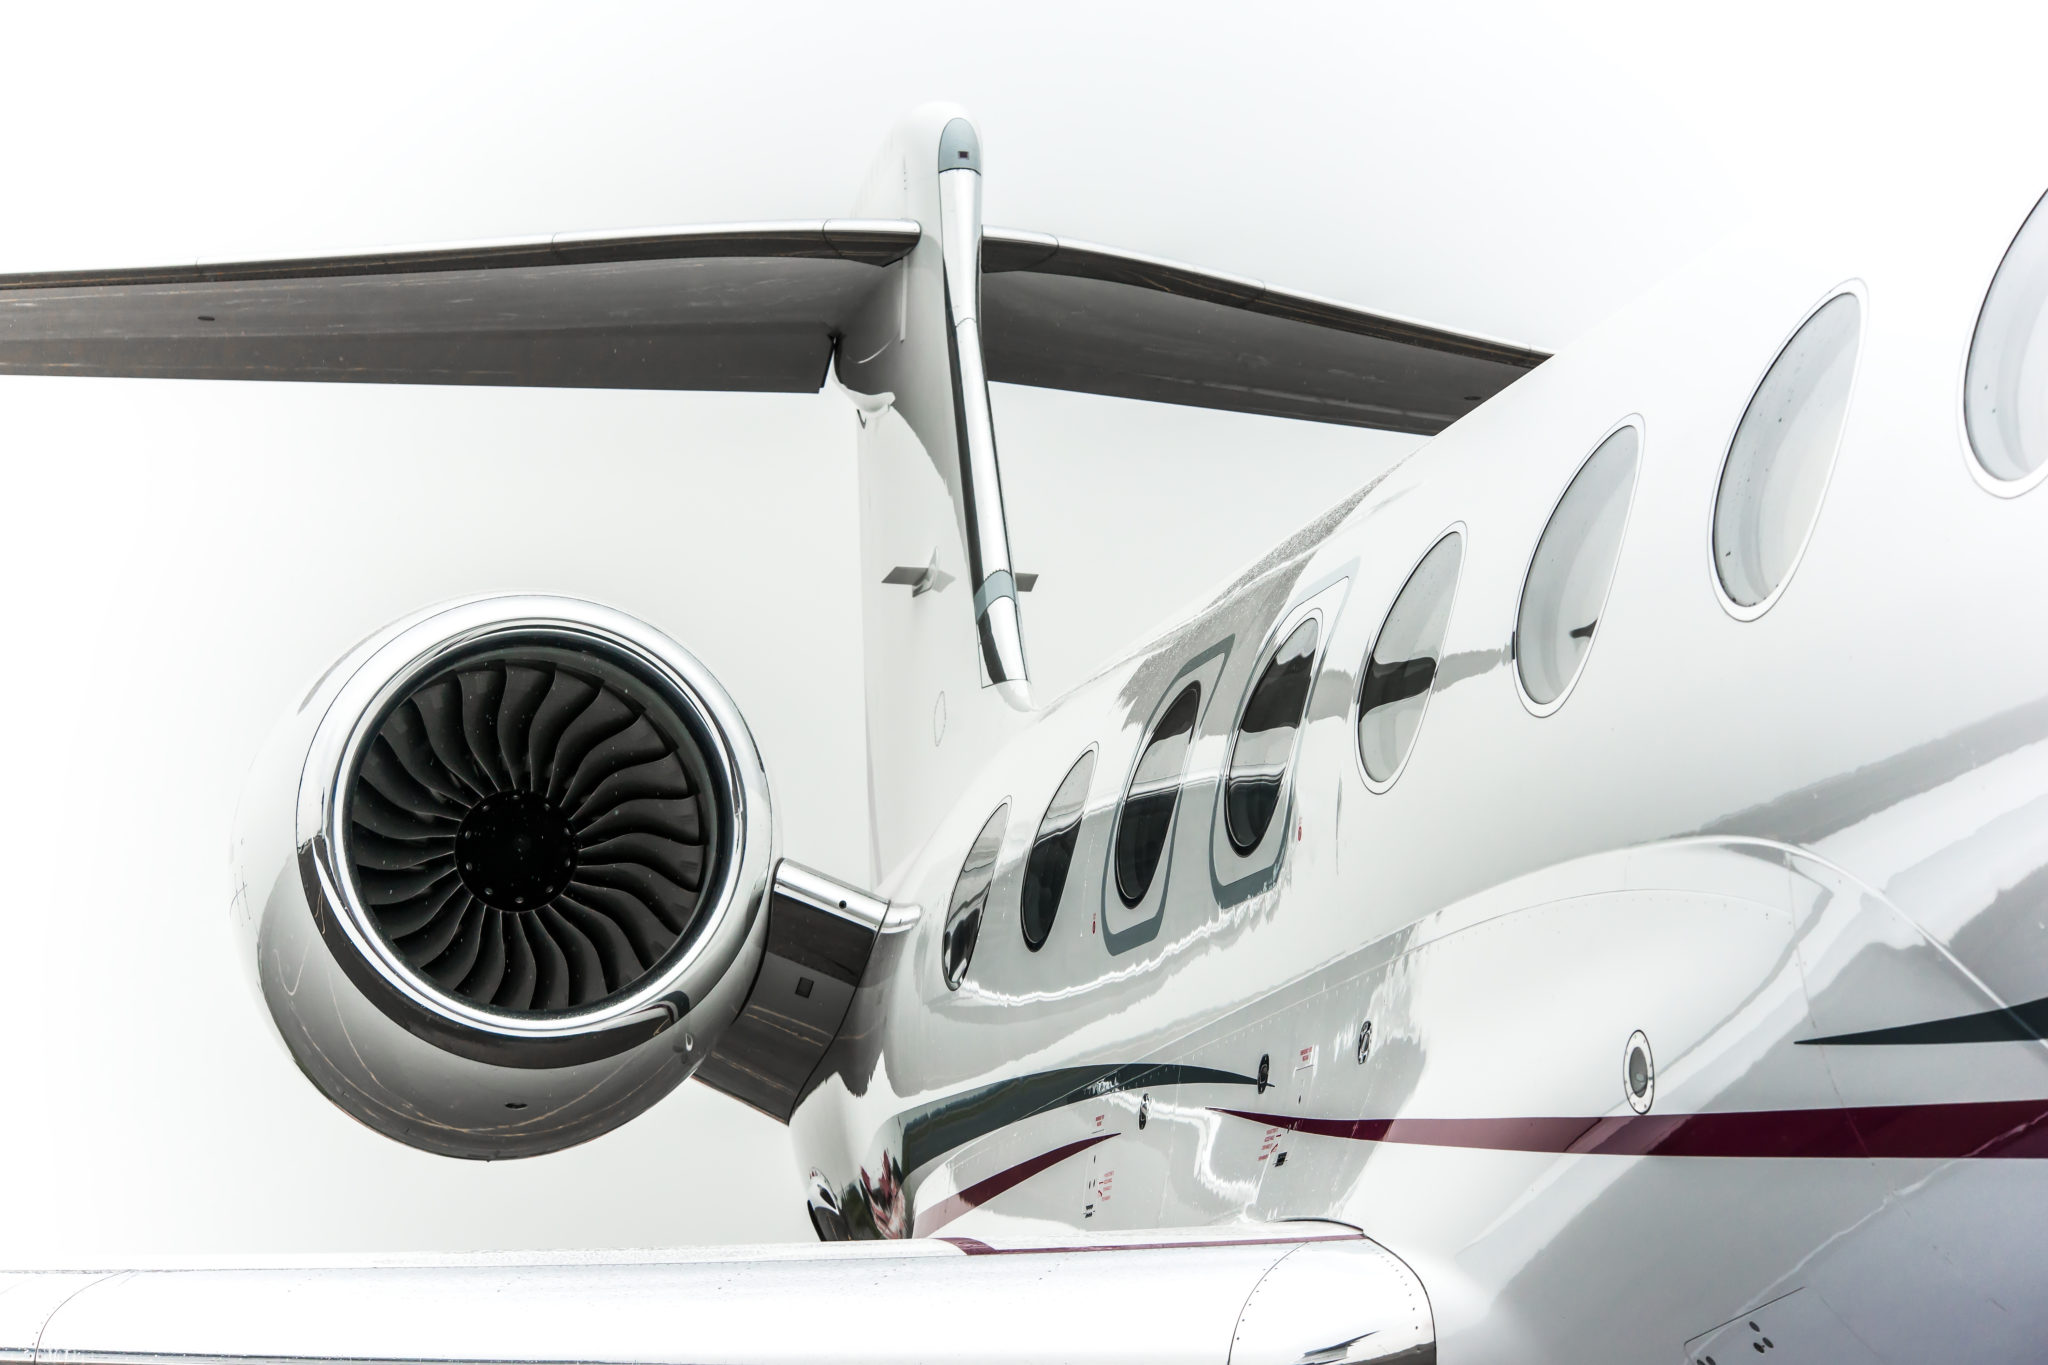 Environment-Friendly Private Jets